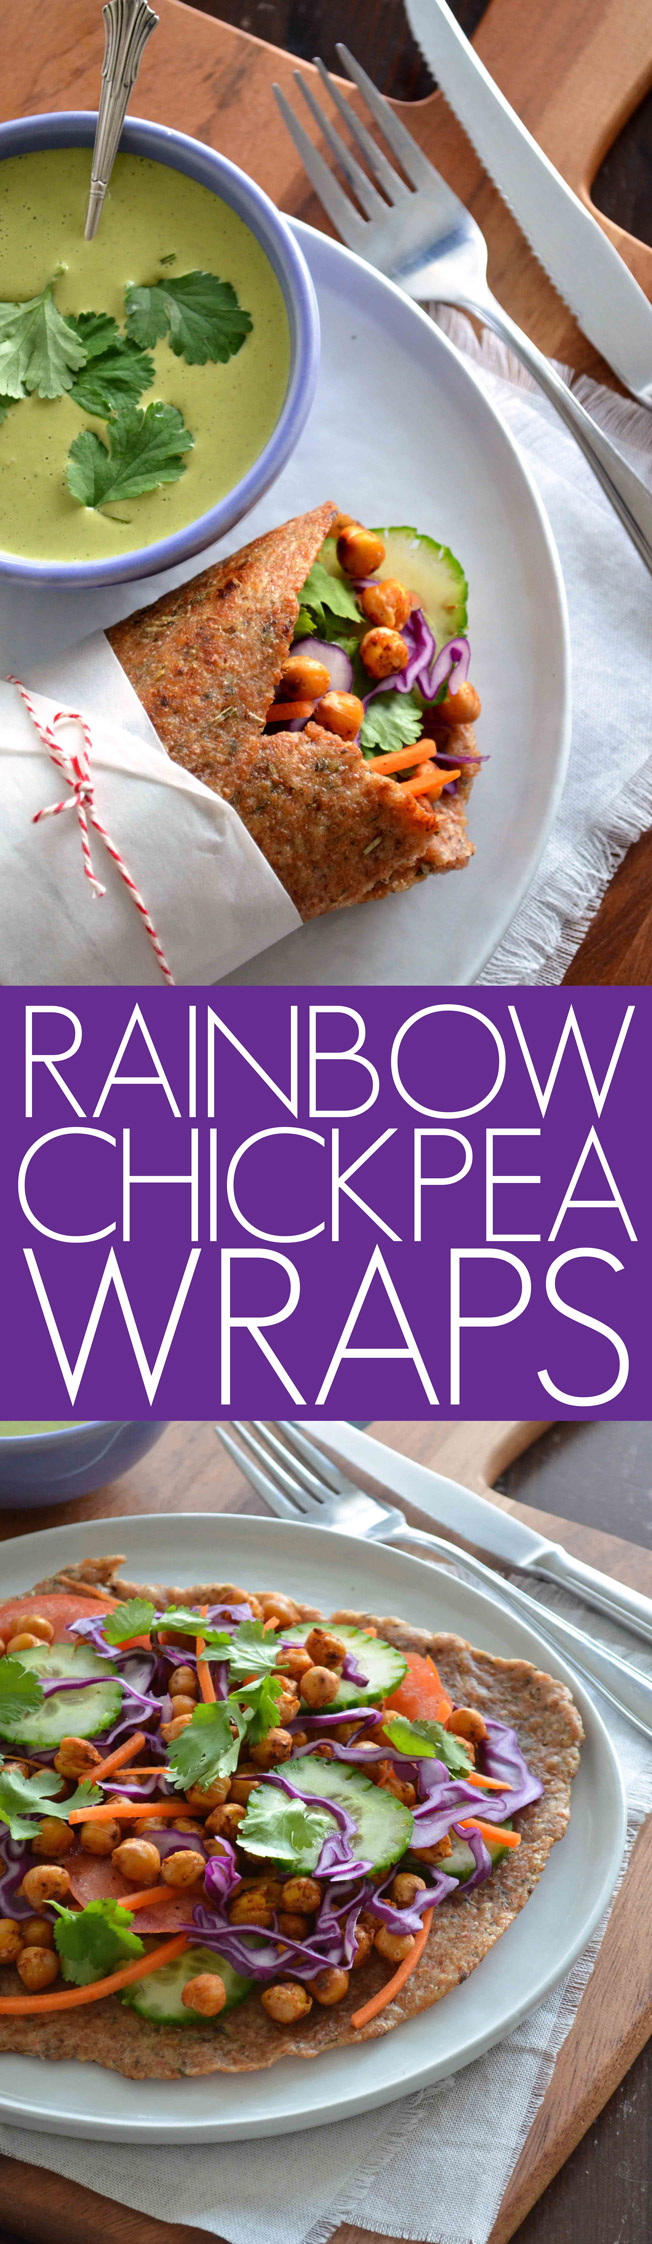 These delicious rainbow chickpea wraps are filled with colorful veggies and delicious roasted chickpeas. 